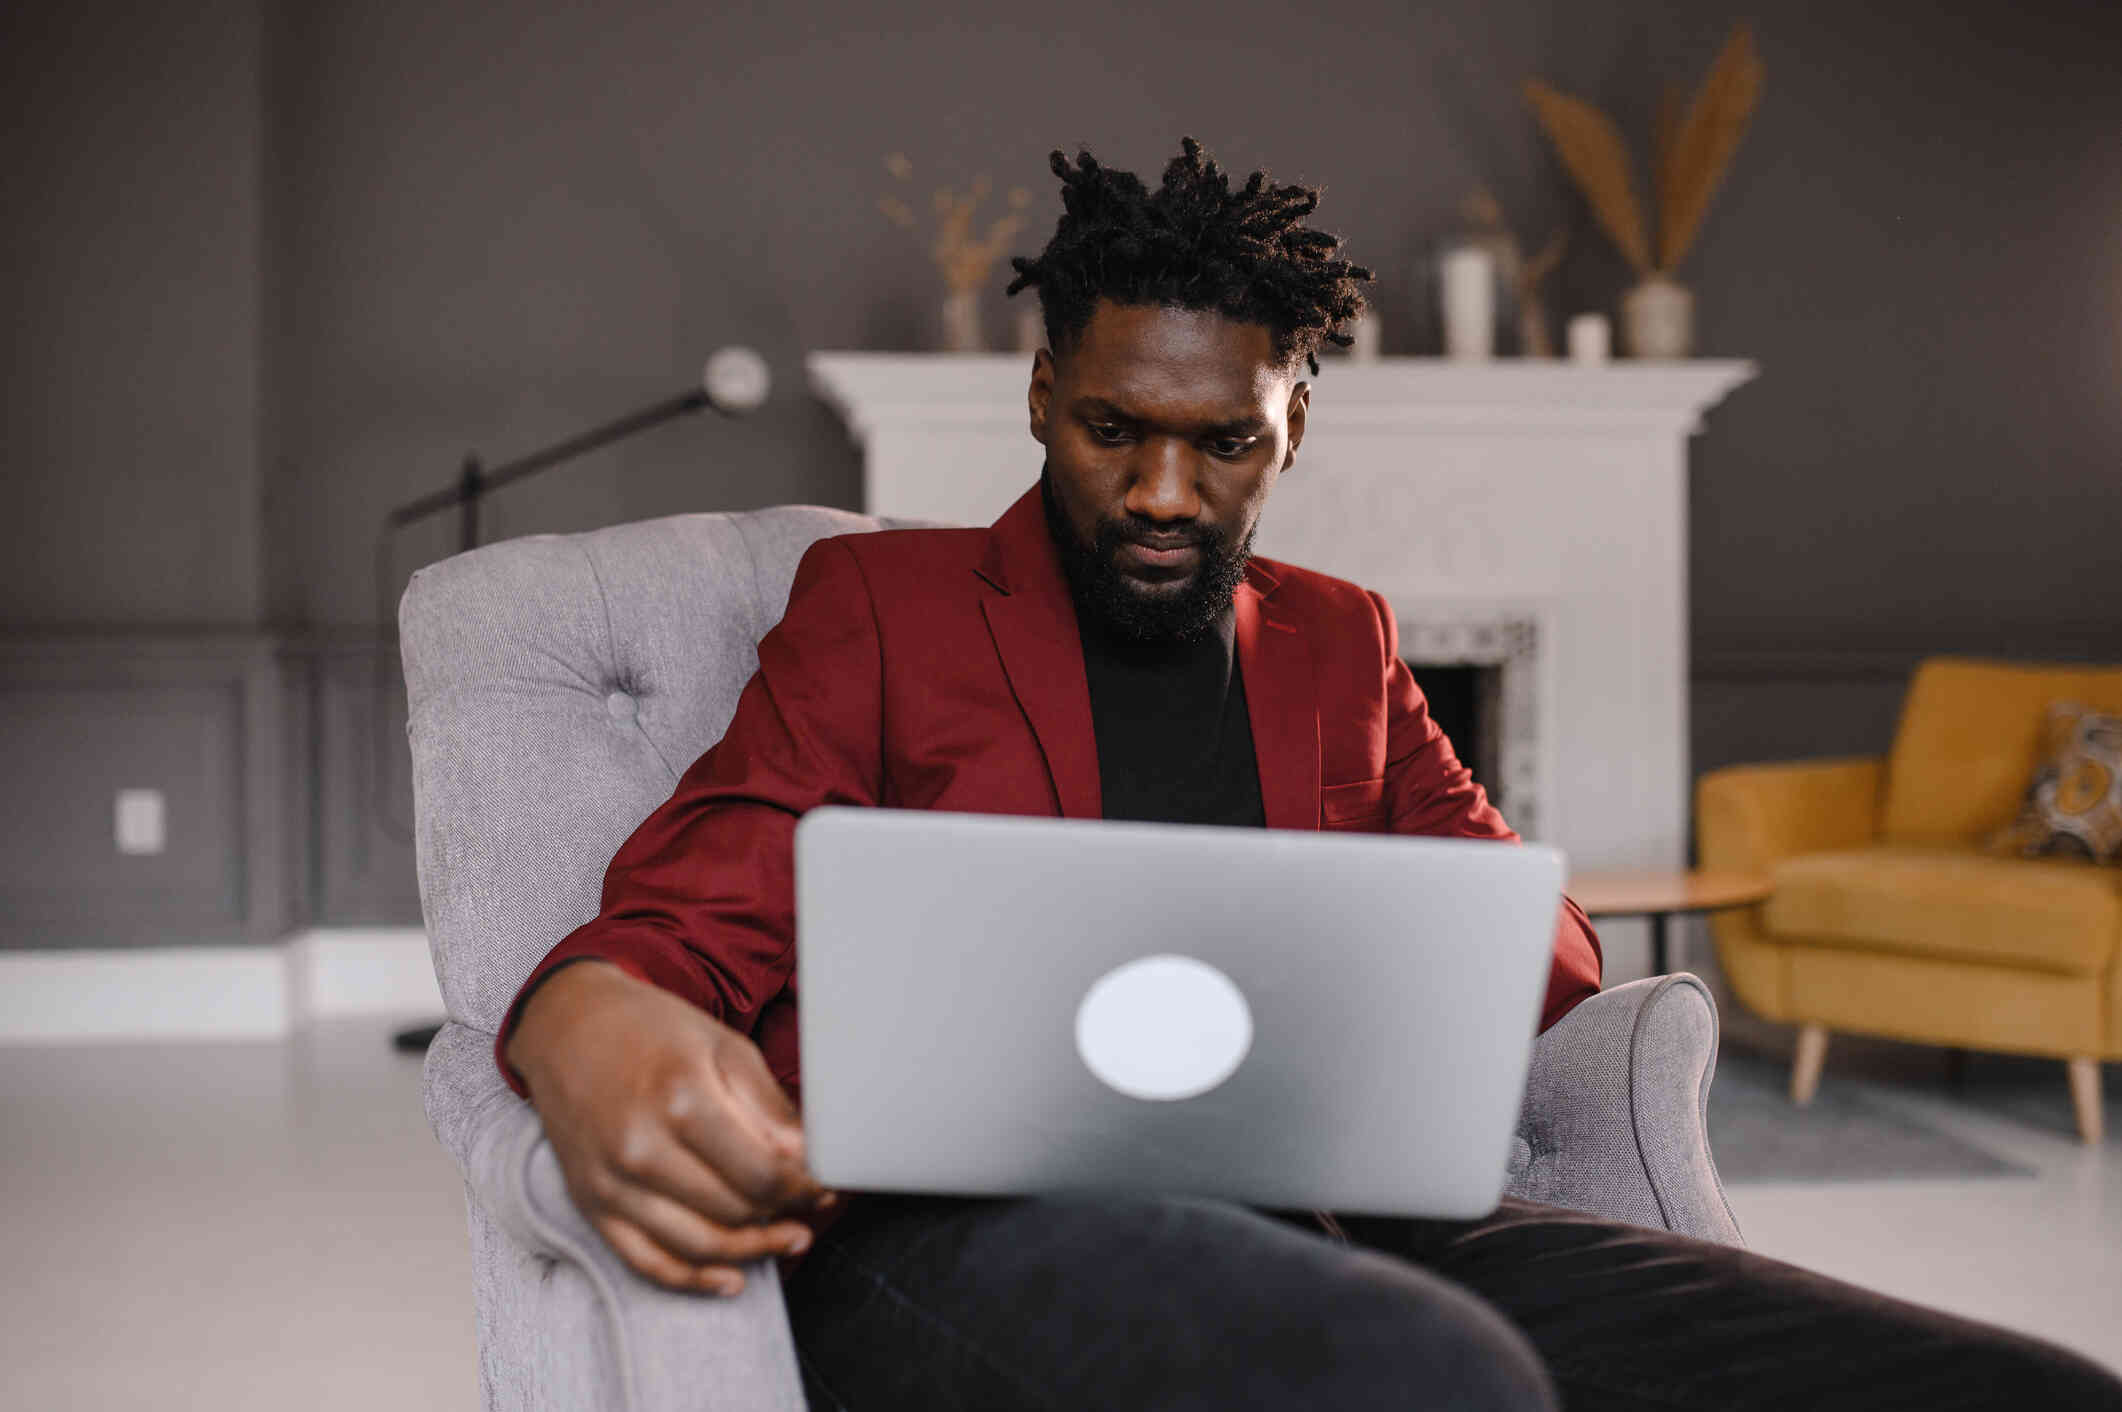 A man in a red blazer sits with his laptop open infront of him and looks at the screen with a serious expression.